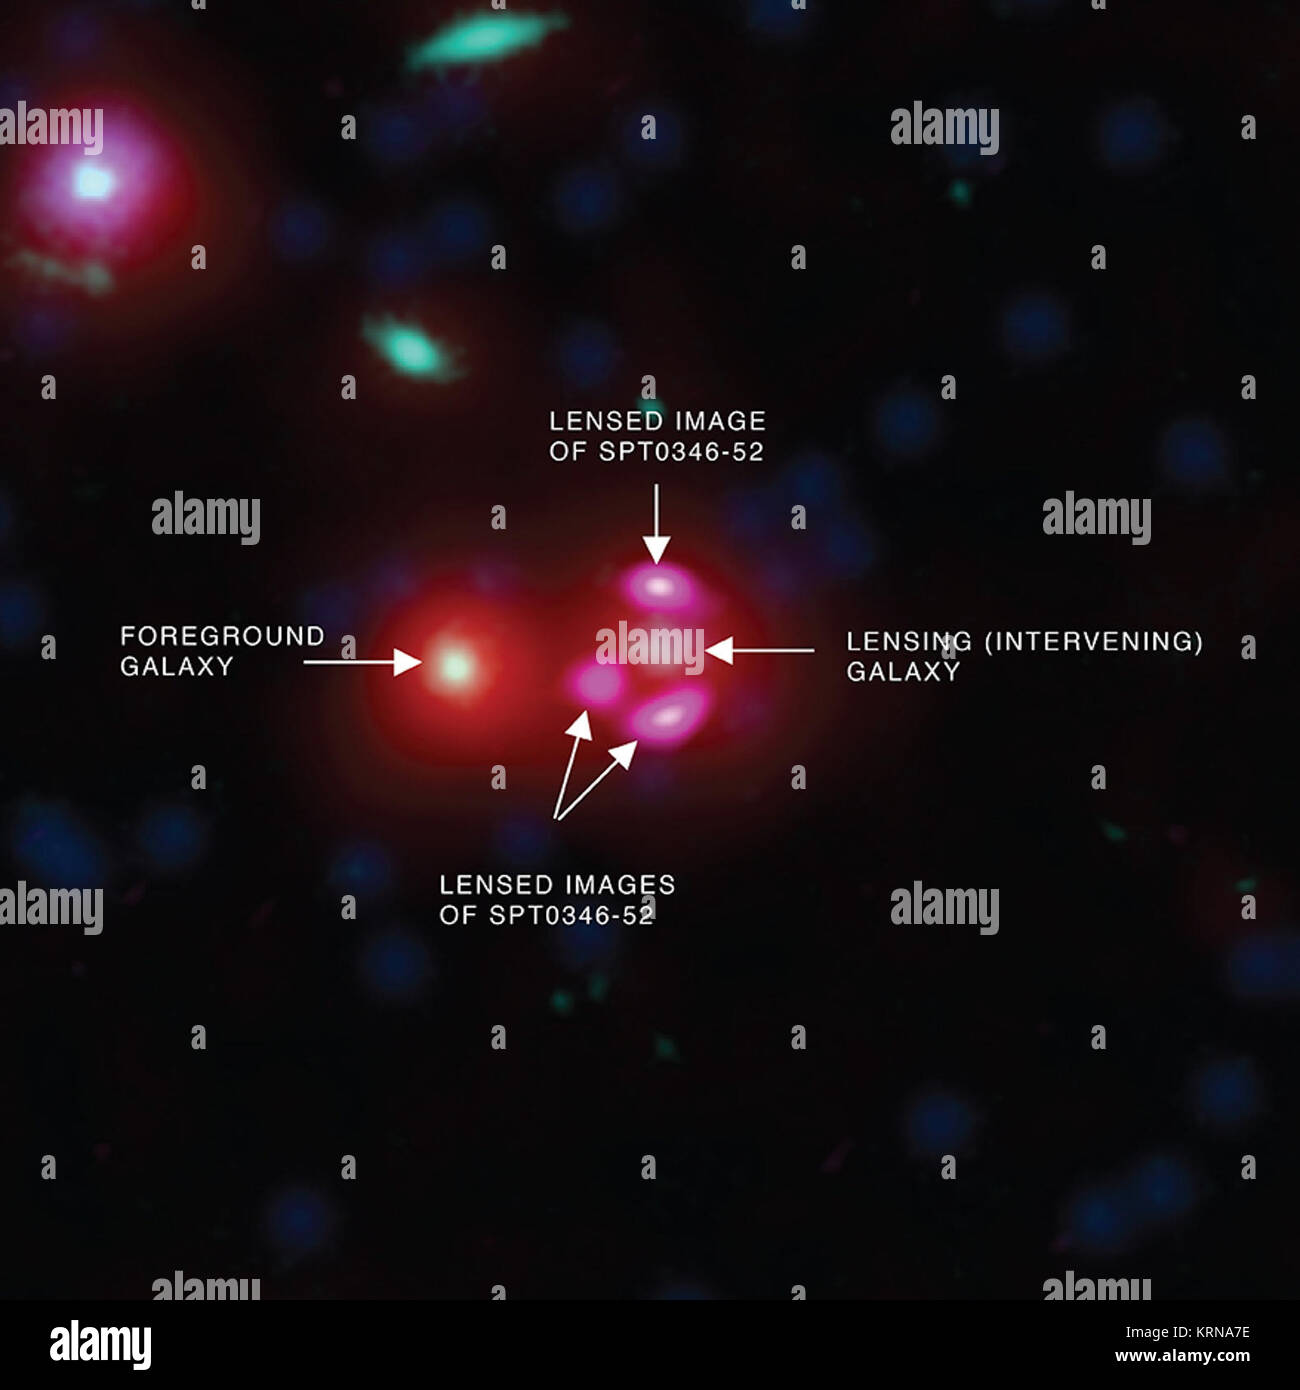 Using several telescopes including Chandra, astronomers have shown that a galaxy in the early Universe called SPT0346-52 is undergoing an extraordinary burst of star formation. This graphic shows a frame from a computer simulation (main image) of such a burst following a galactic merger and data from Chandra, Spitzer, ALMA, and Hubble of the distant galaxy (inset). The absence of X-rays from Chandra (blue) in the inset shows that there is no actively growing, supermassive black hole in the center of the galaxy. This means that the rate amount of infrared emission detected by other telescopes c Stock Photo